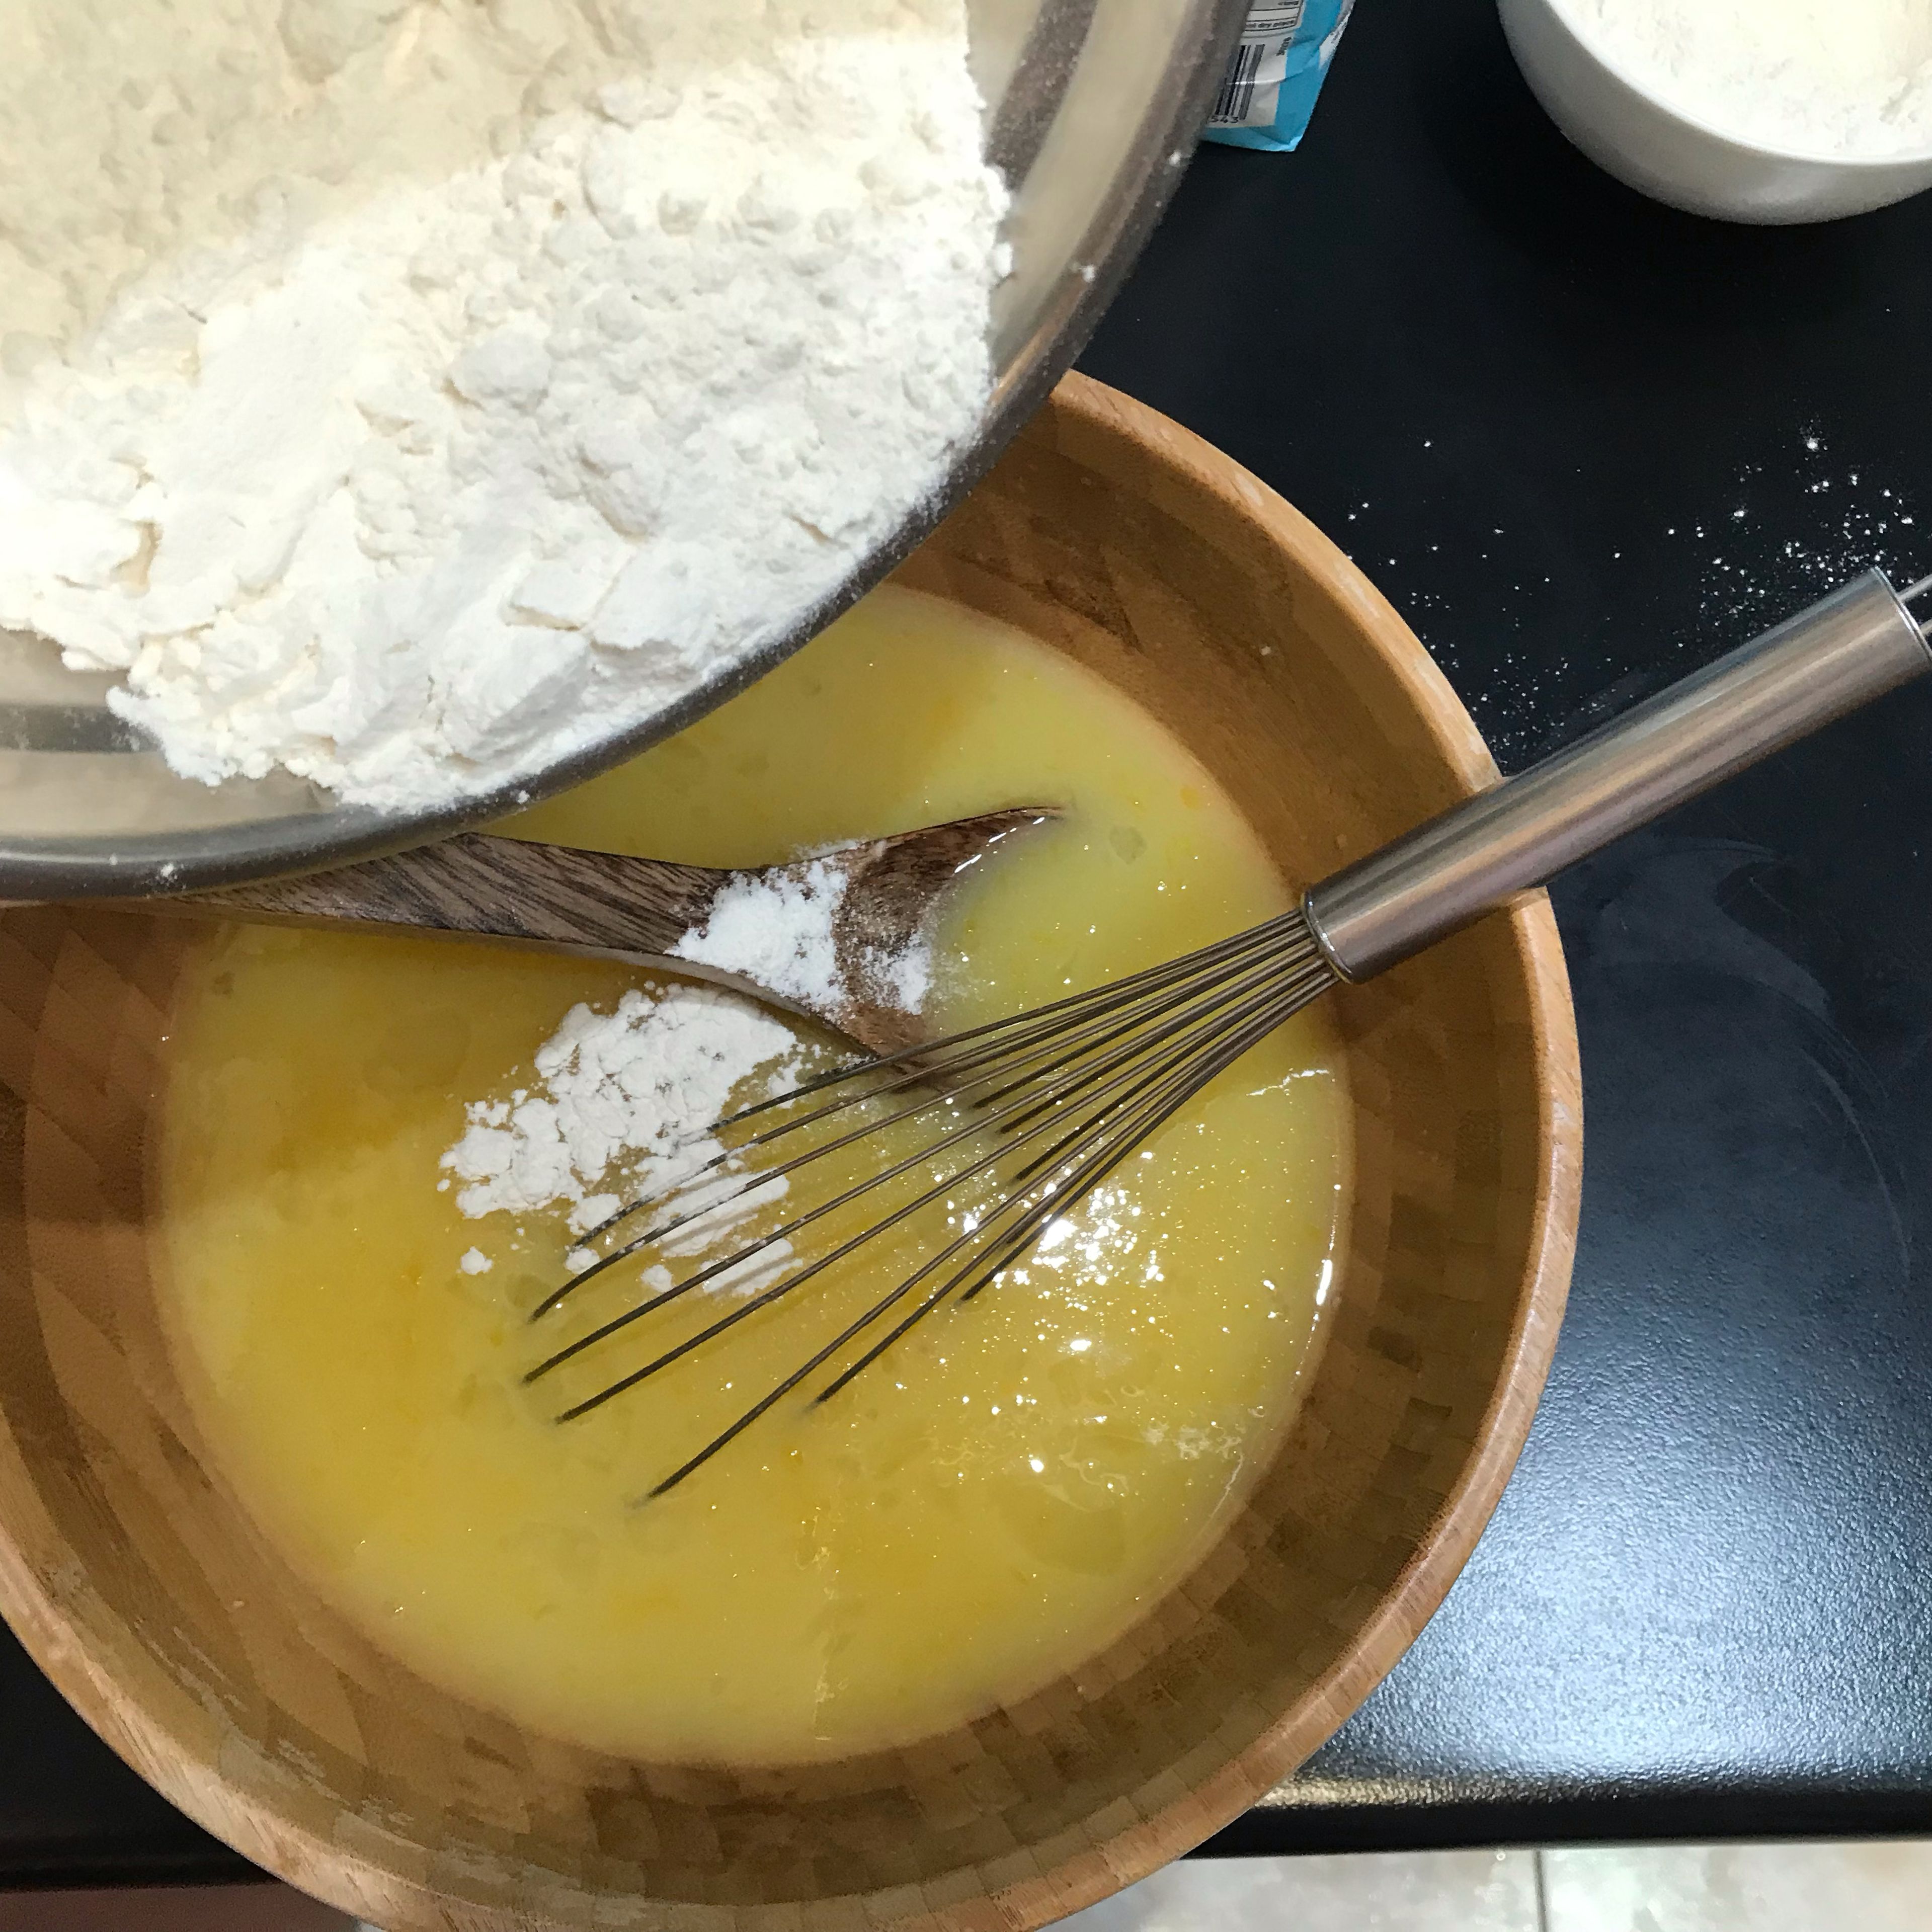 Sift flours together into a separate bowl. Whisk sifted flours, extract, eggs and purple food coloring into the white chocolate mixture. (The purple food coloring will help to offset the yellow color in the batter.)